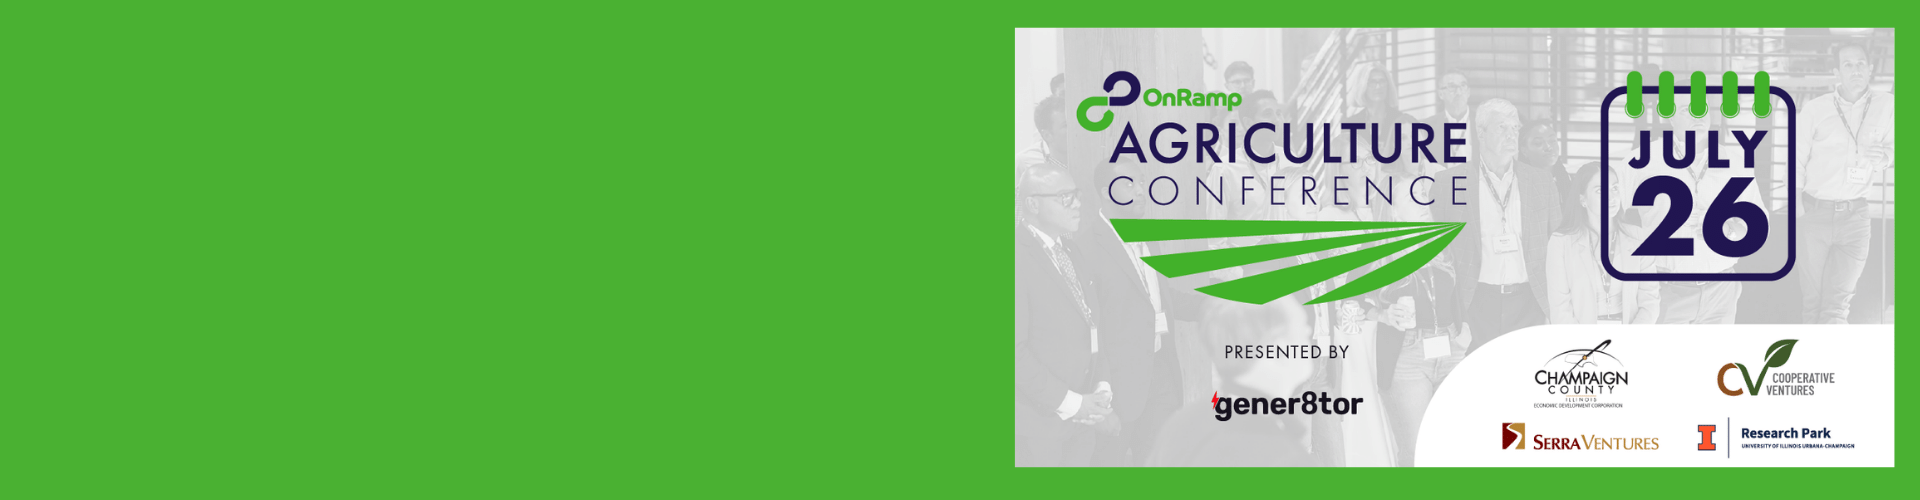 OnRamp Agriculture Moves to Champaign